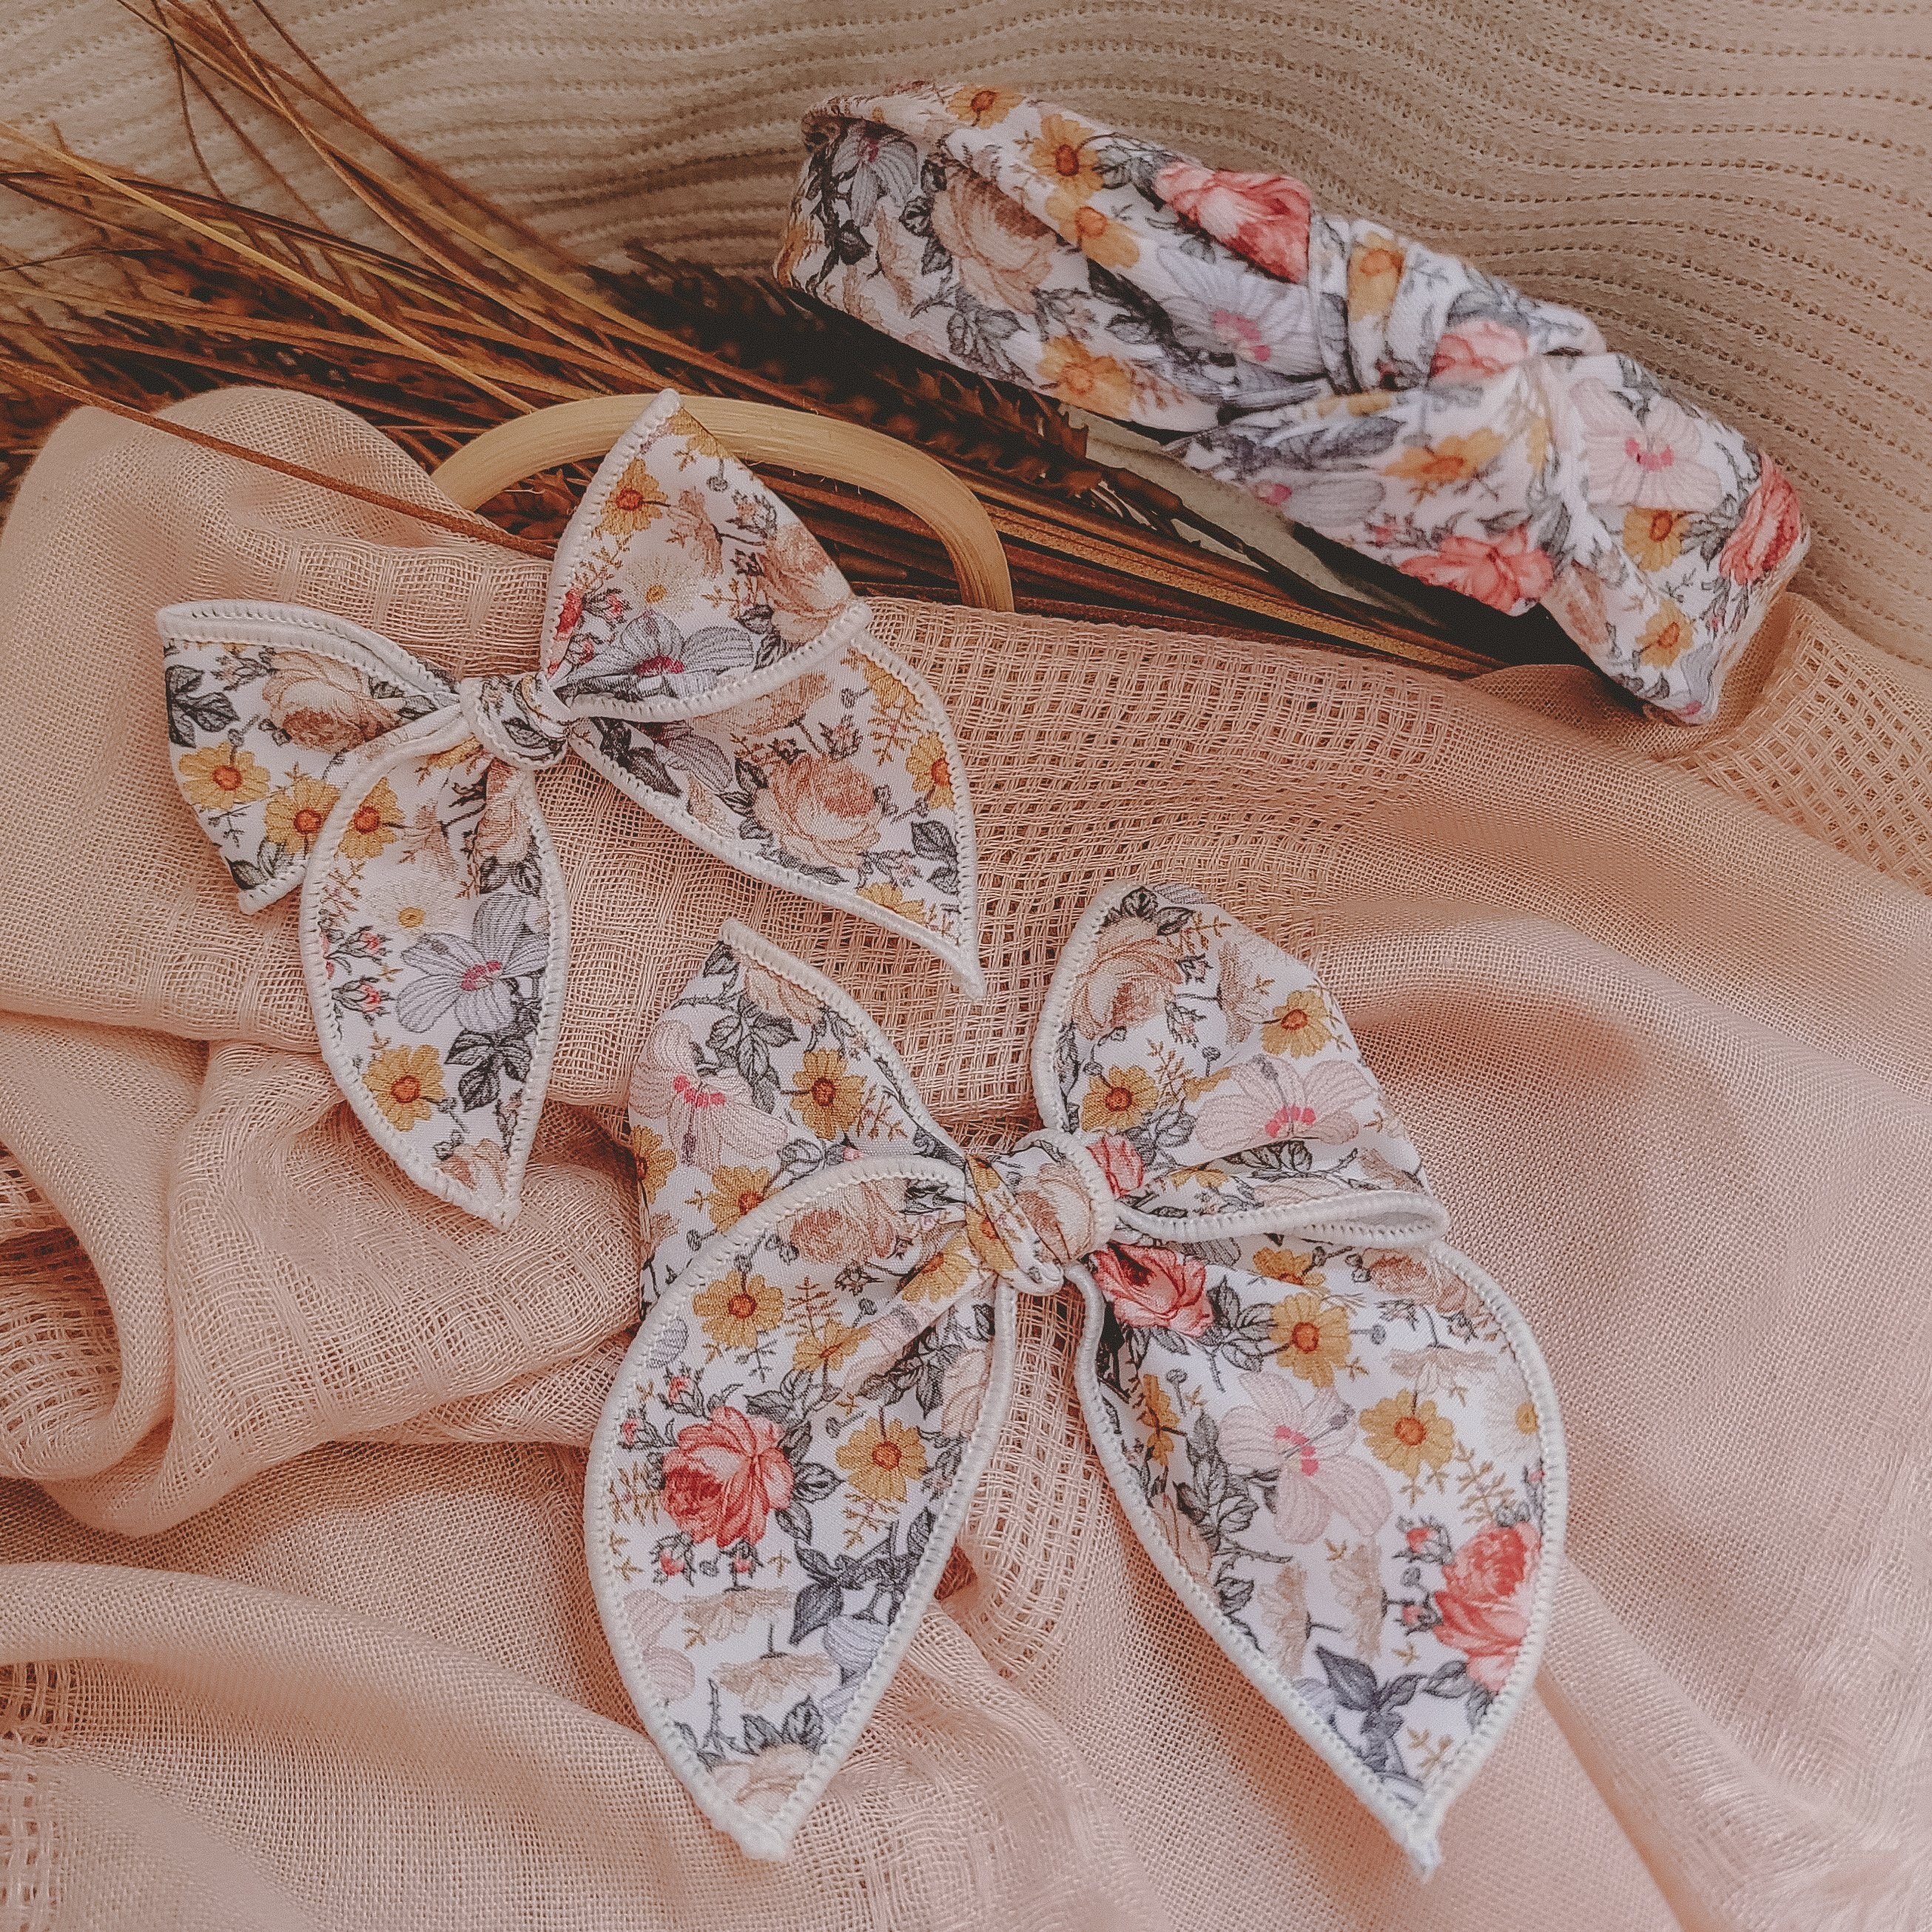 WHIMSY BOW // HAZEL BLOOMS - Elisa’s Little Blossoms Accessories 